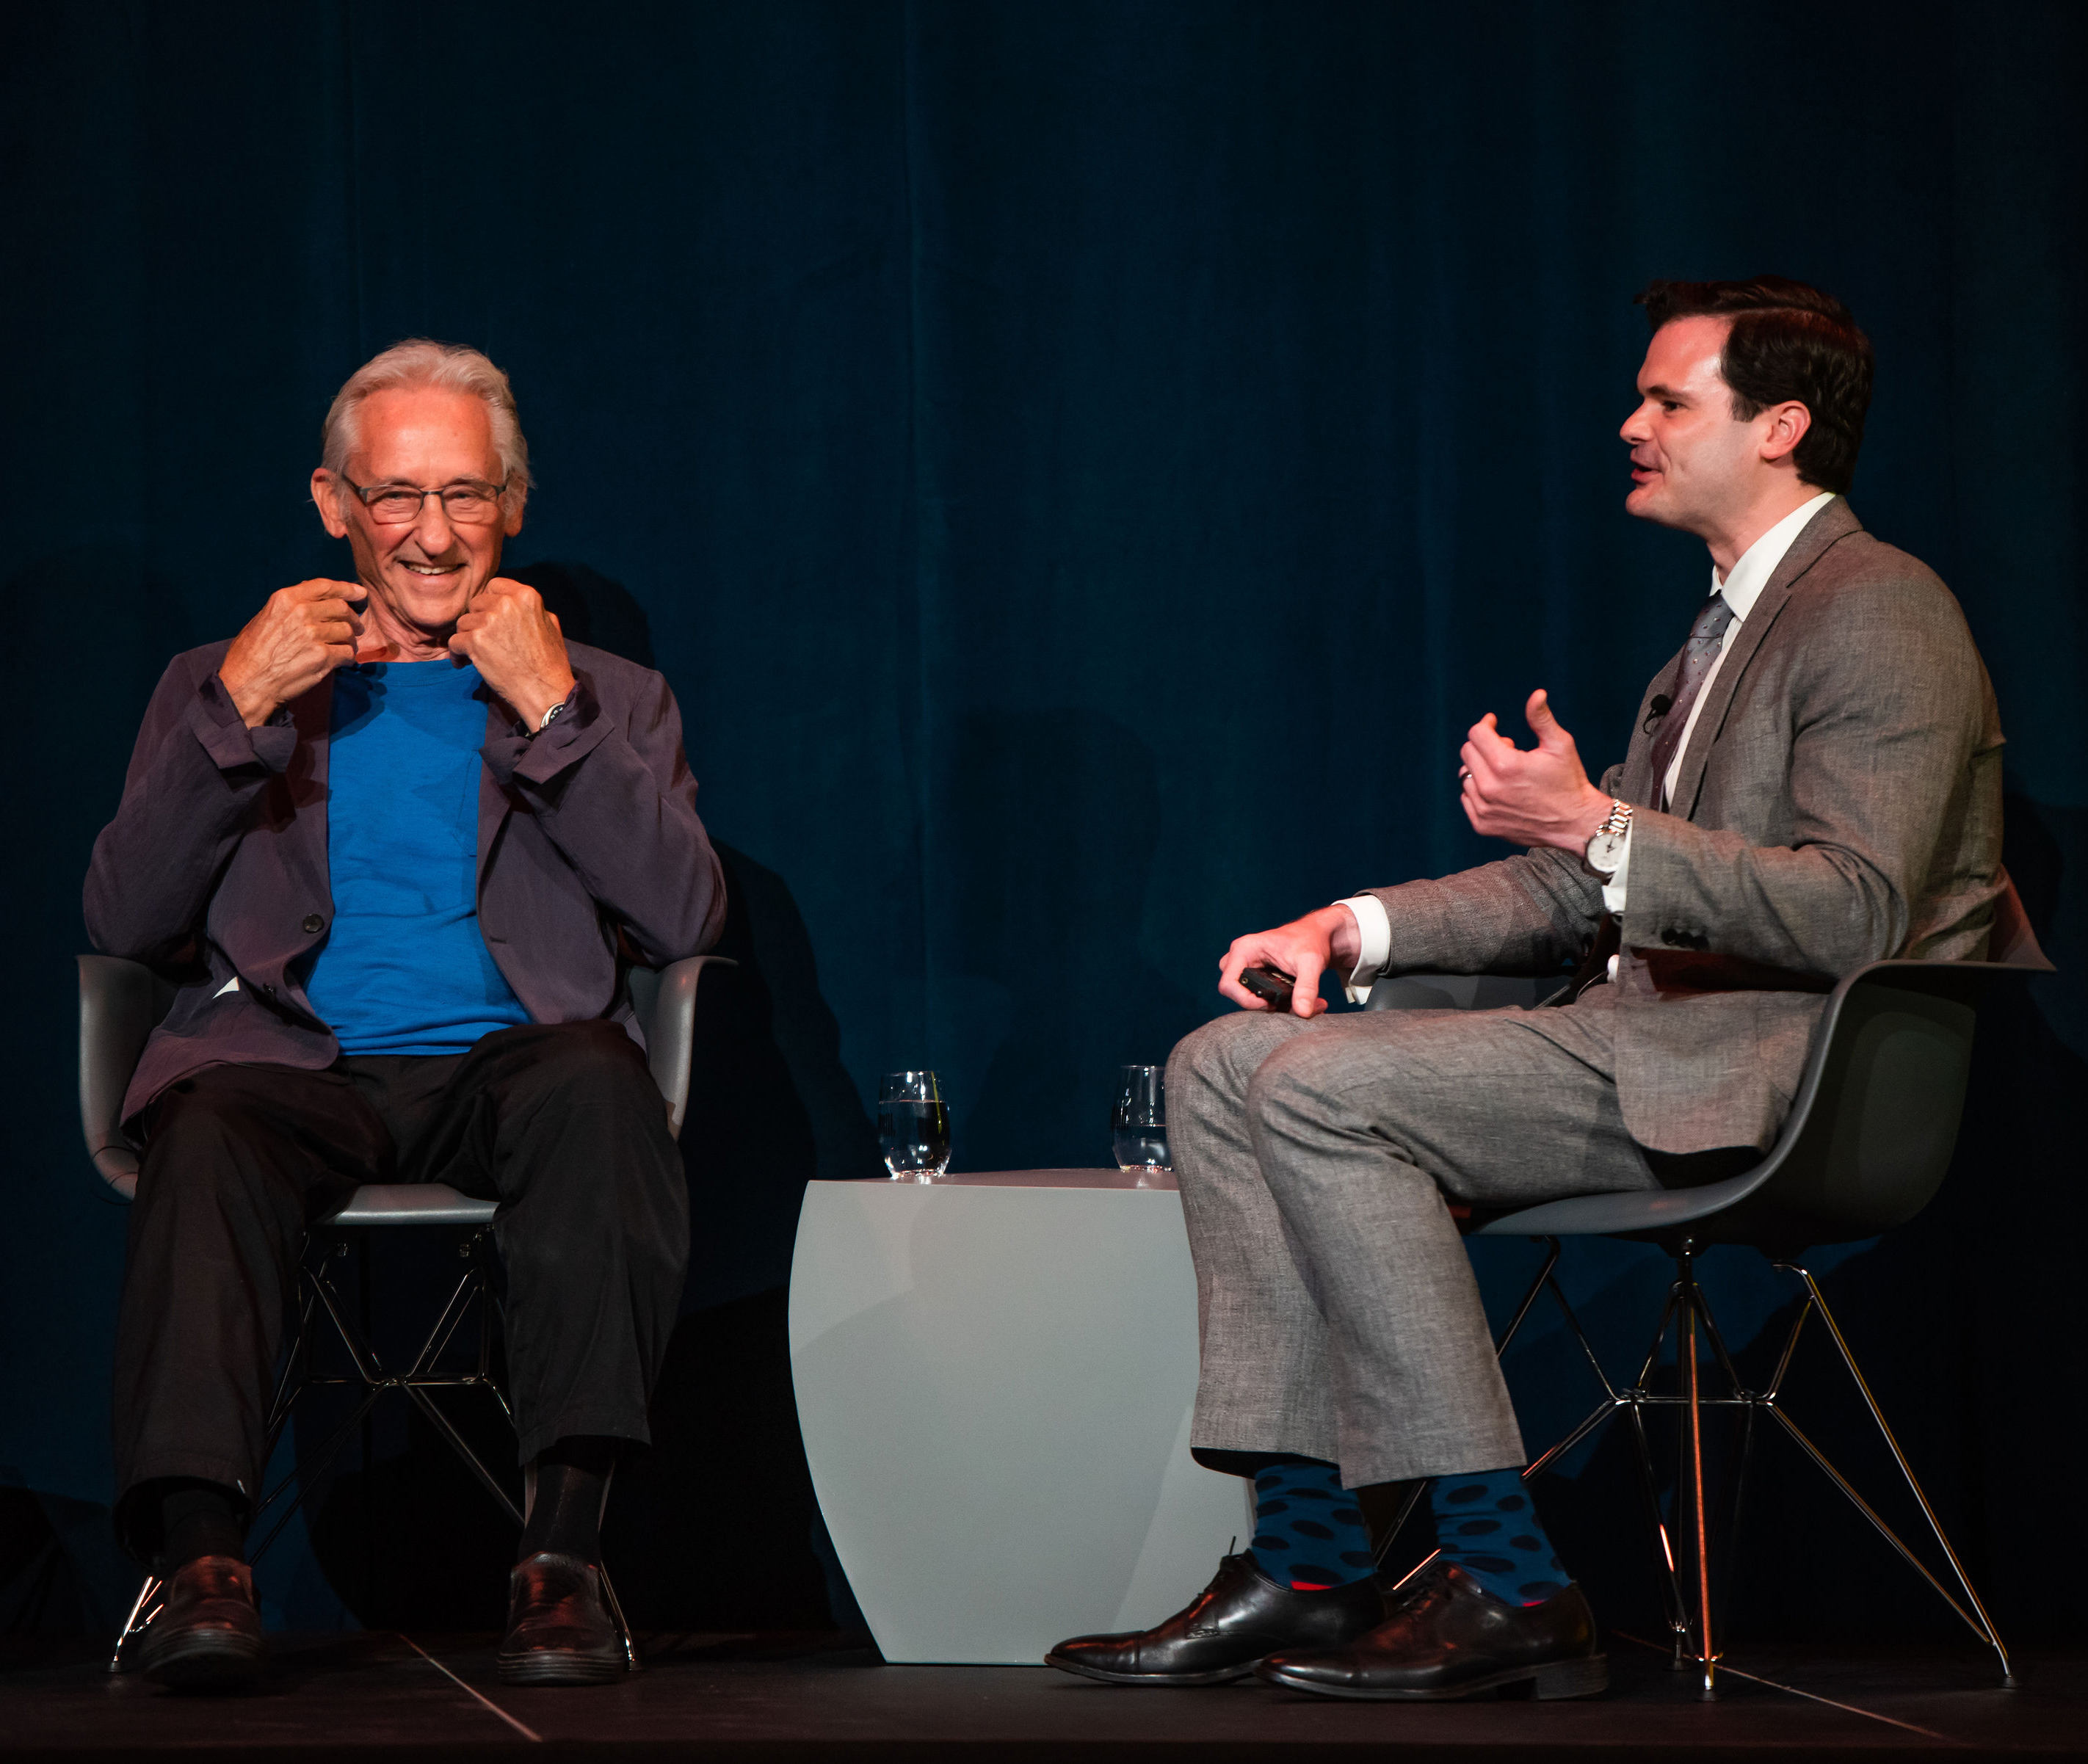 Two men -- one in a blue shirt and sport coat and one in a suit -- talk on a stage